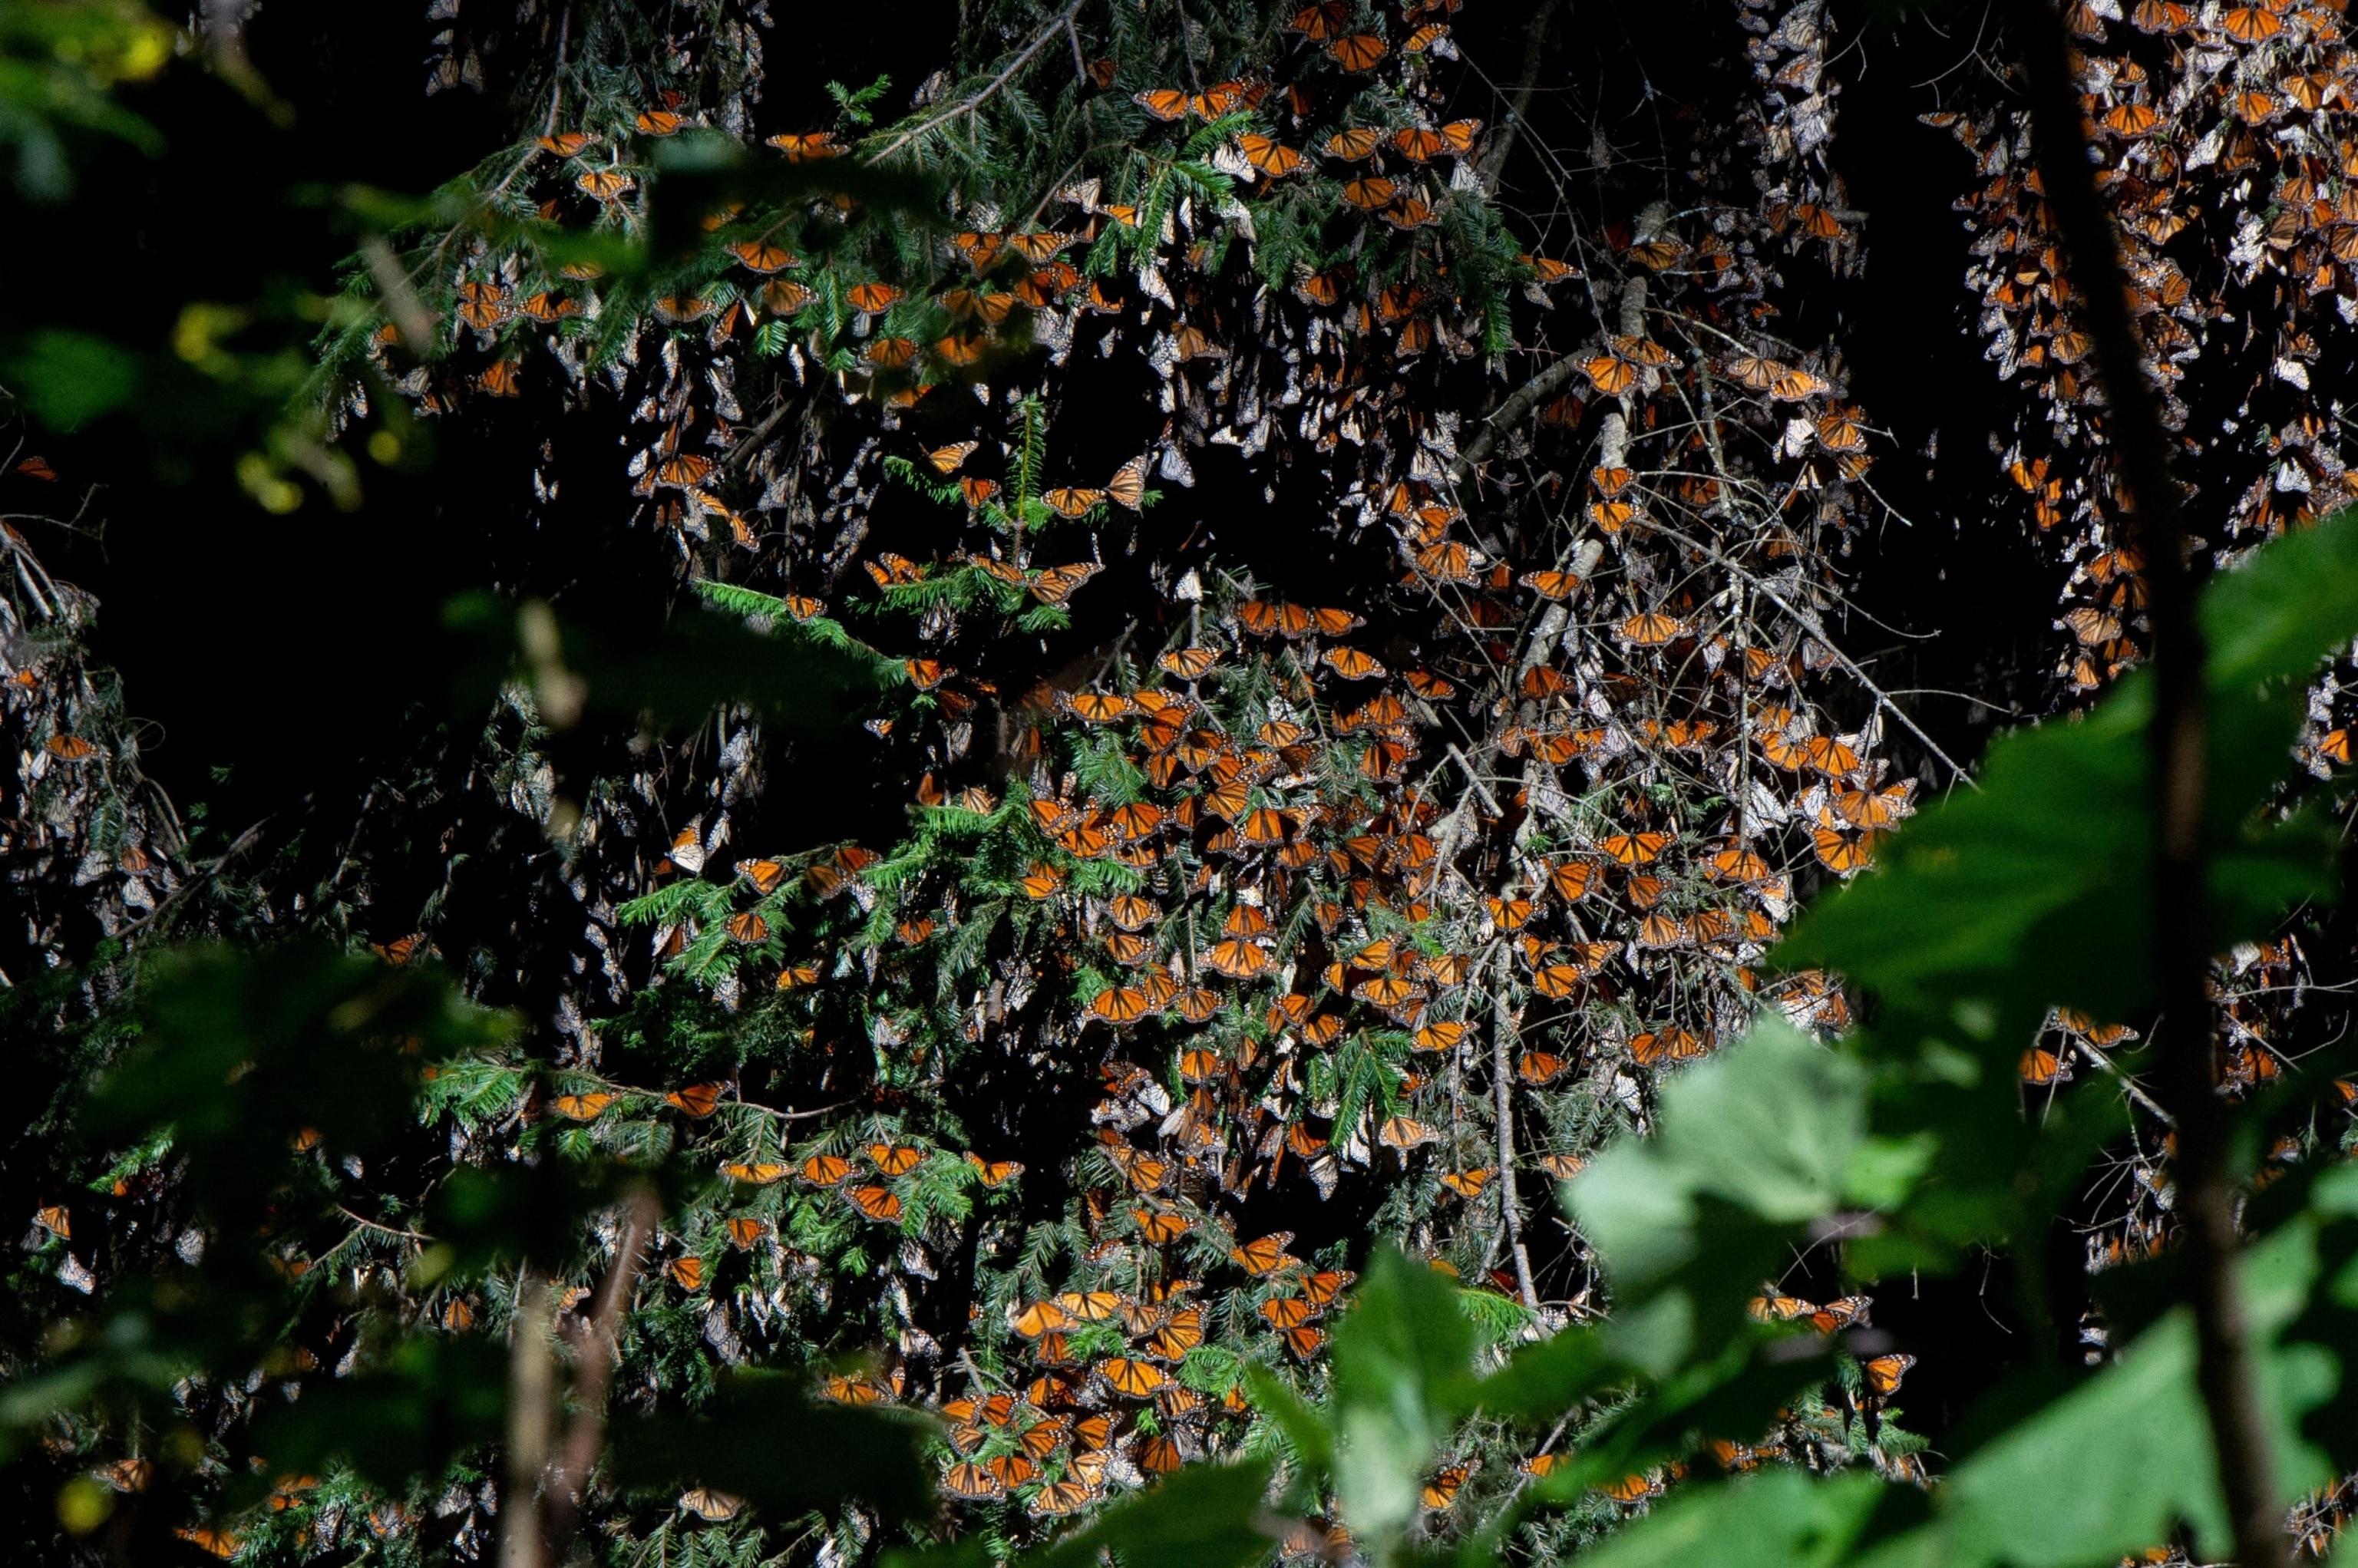 PHOTO: Monarch butterflies are seen at the Rosario Sanctuary, the winter home of Monarch butterflies Michoacan state, Mexico, on Feb. 11, 2022.